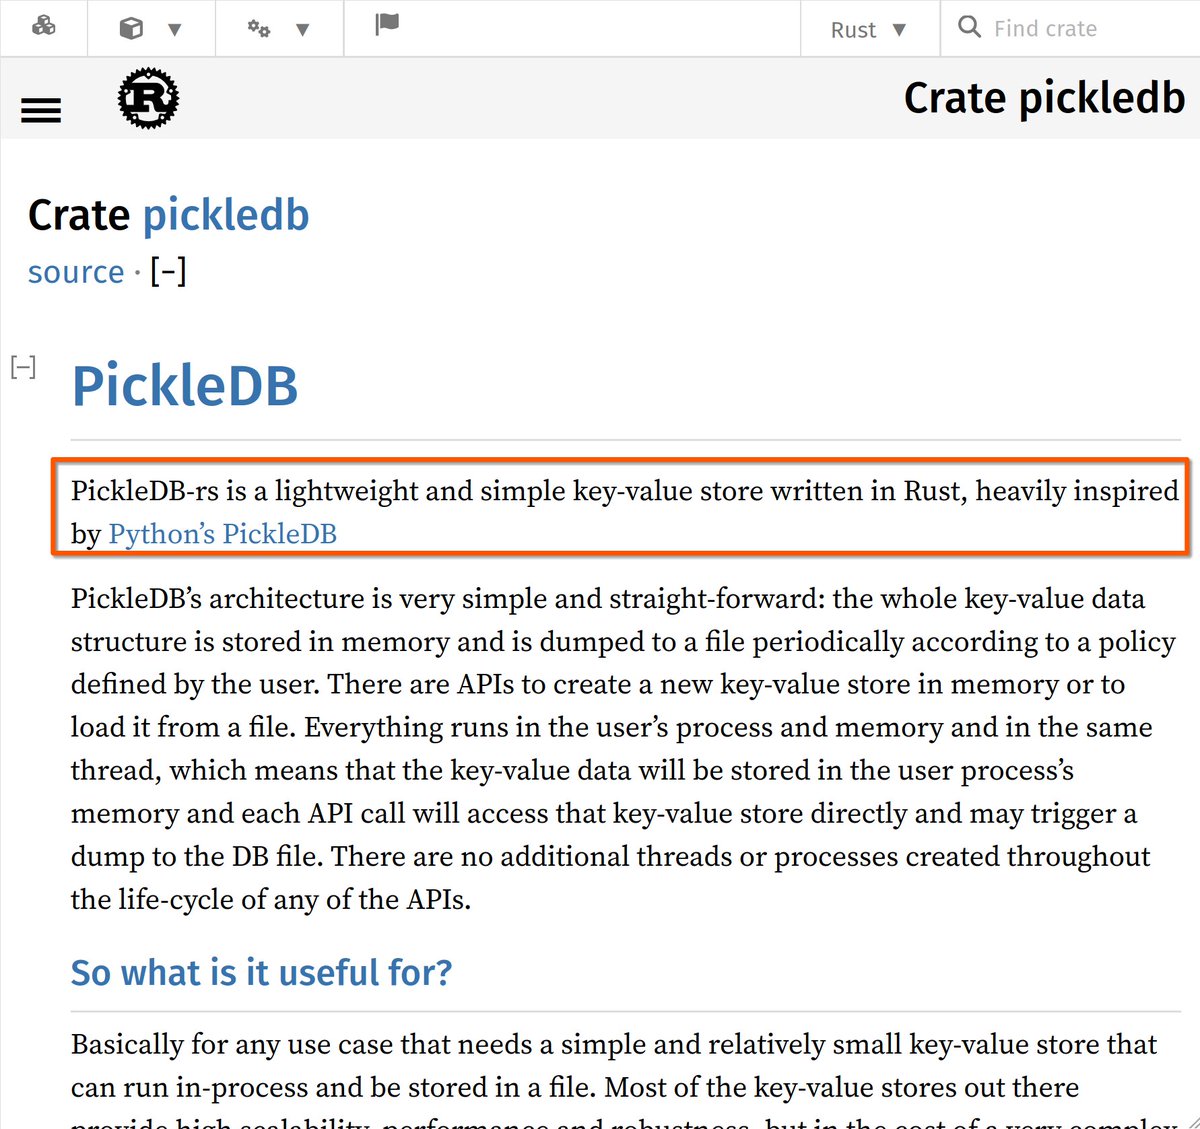 TIL about another PickleDB (docs.rs/pickledb/). This one is in Rust and is inspired by the orig Python PickleDB (patx.github.io/pickledb/). It's okay to build a new DBMS based on an existing but don't copy the same name too! So many obvious choices (GherkinDB, CucumberDB).